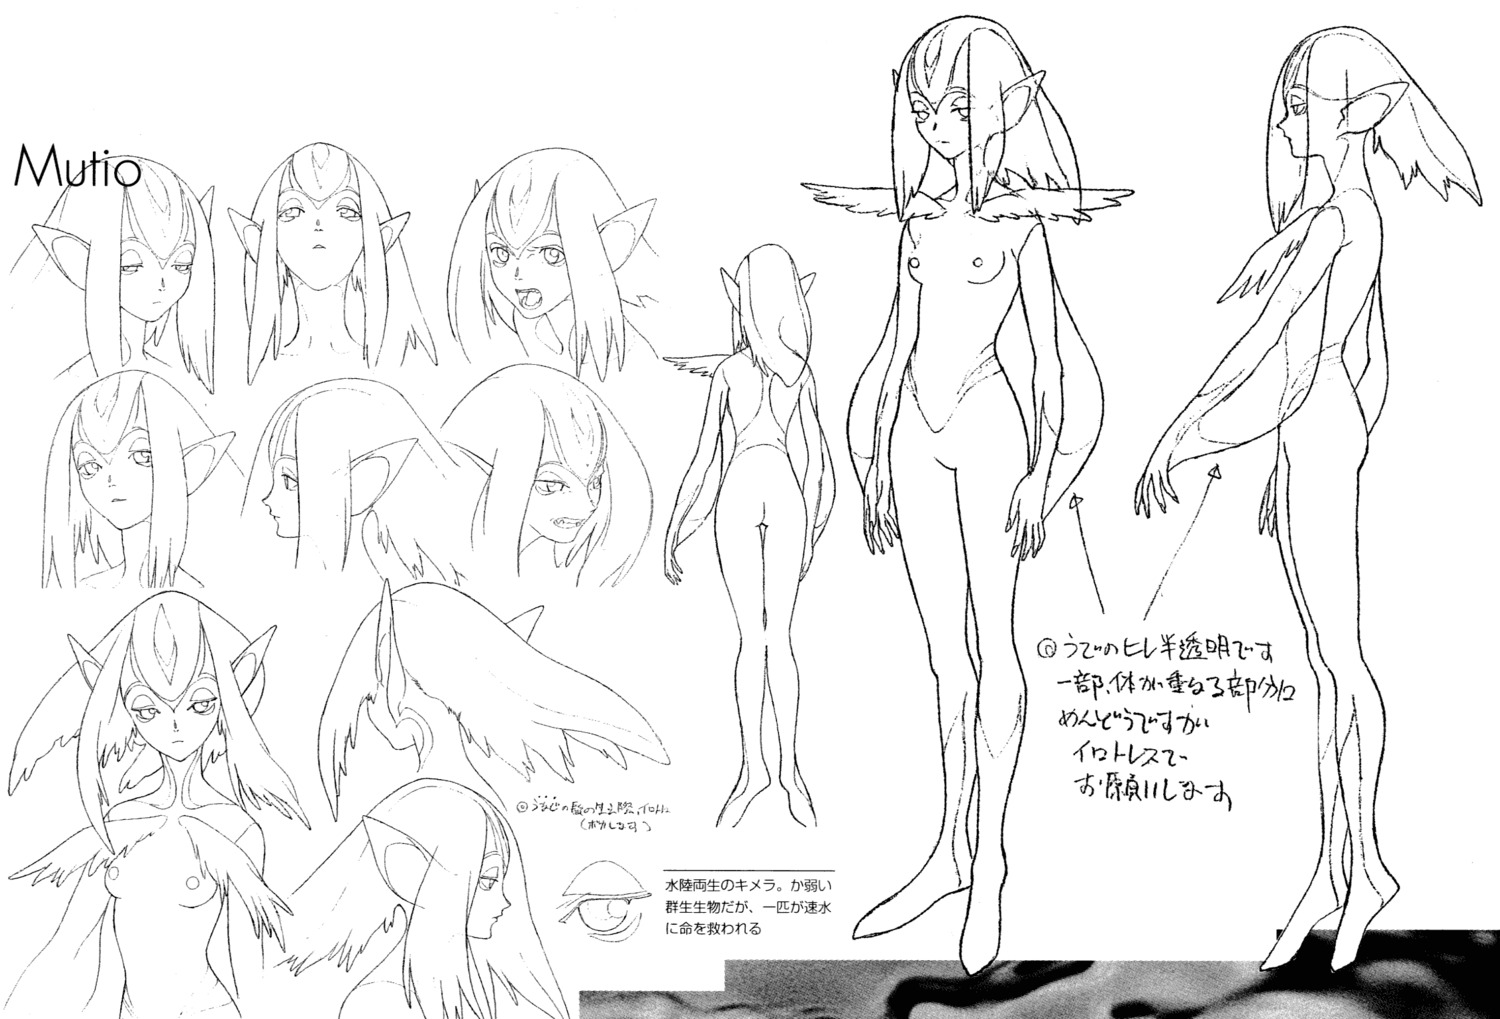 artist_unknown blue_submarine_no_6 character_design creatures production_materials settei